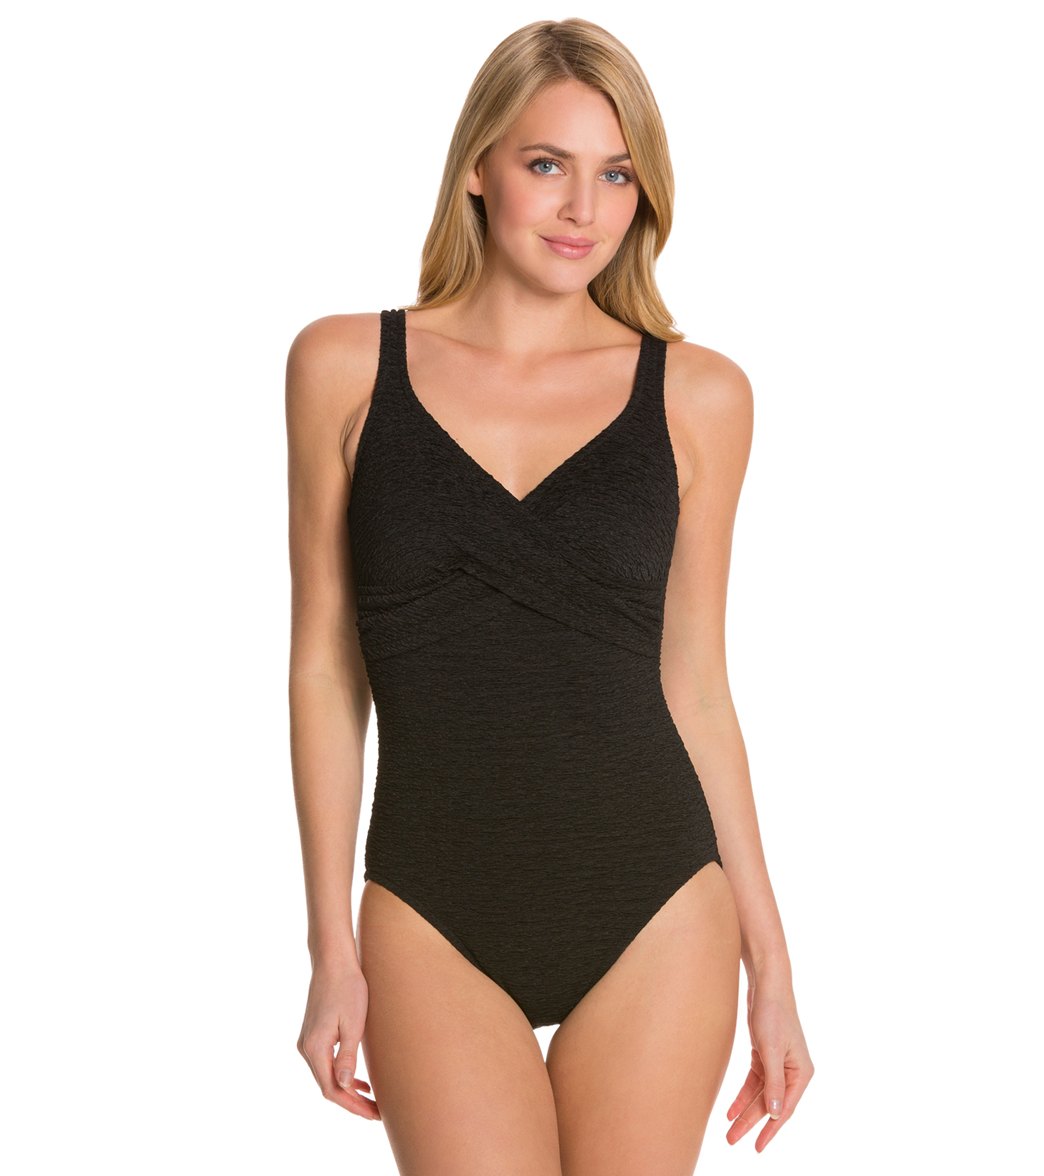 Penbrooke Krinkle Chlorine Resistant Cross Over One Piece Swimsuit - Black 14 Polyester - Swimoutlet.com